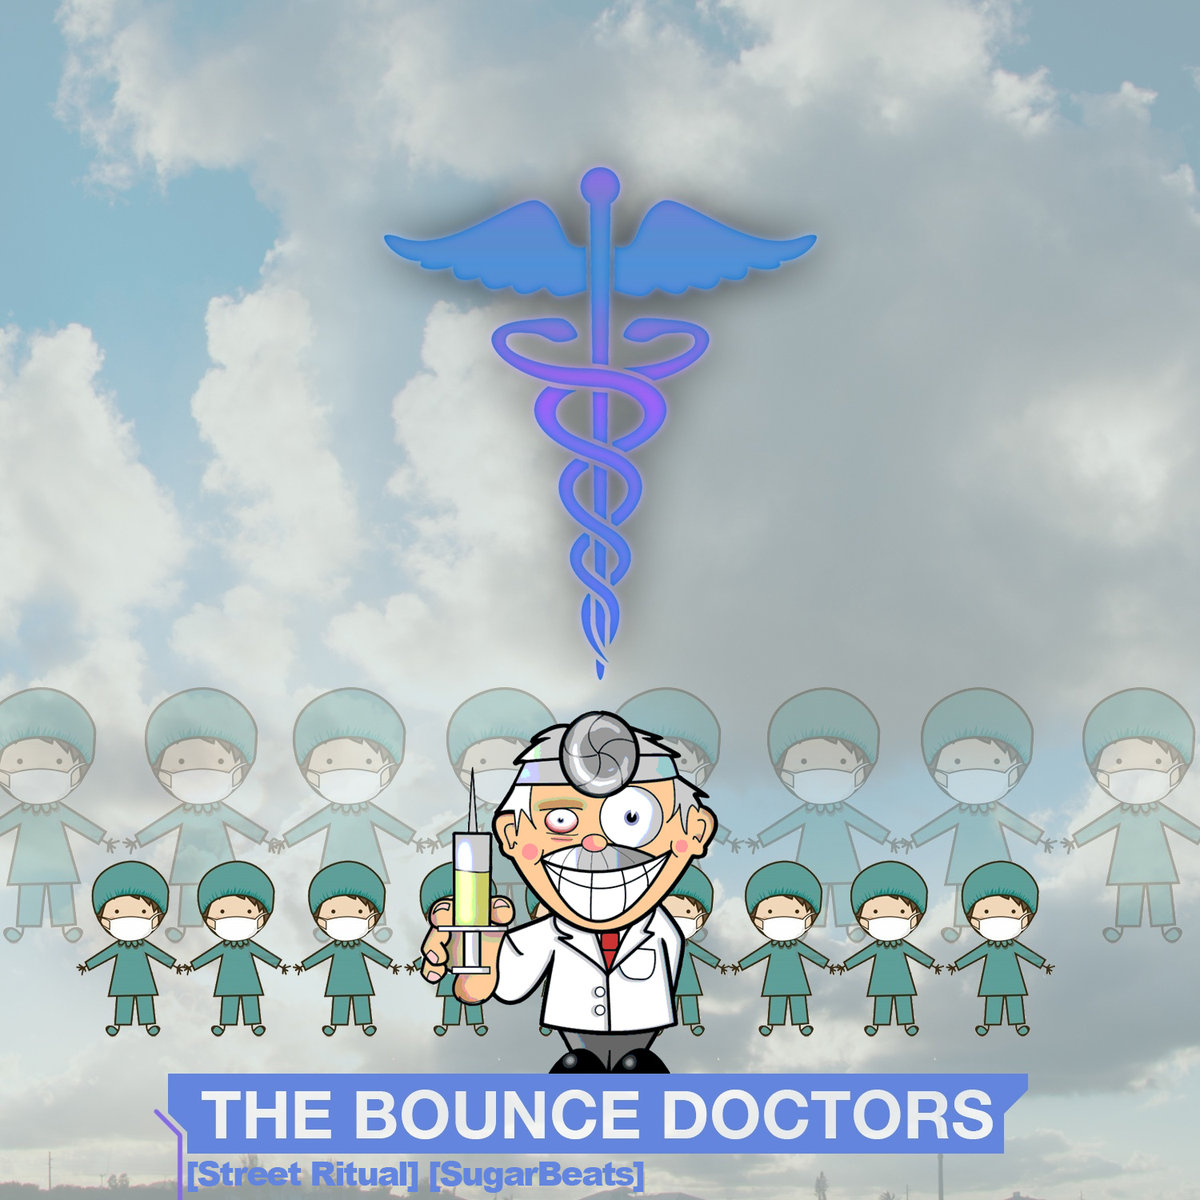 Mochipet - Unstoppable @ 'The Bounce Doctors' album (bass, chillstep)